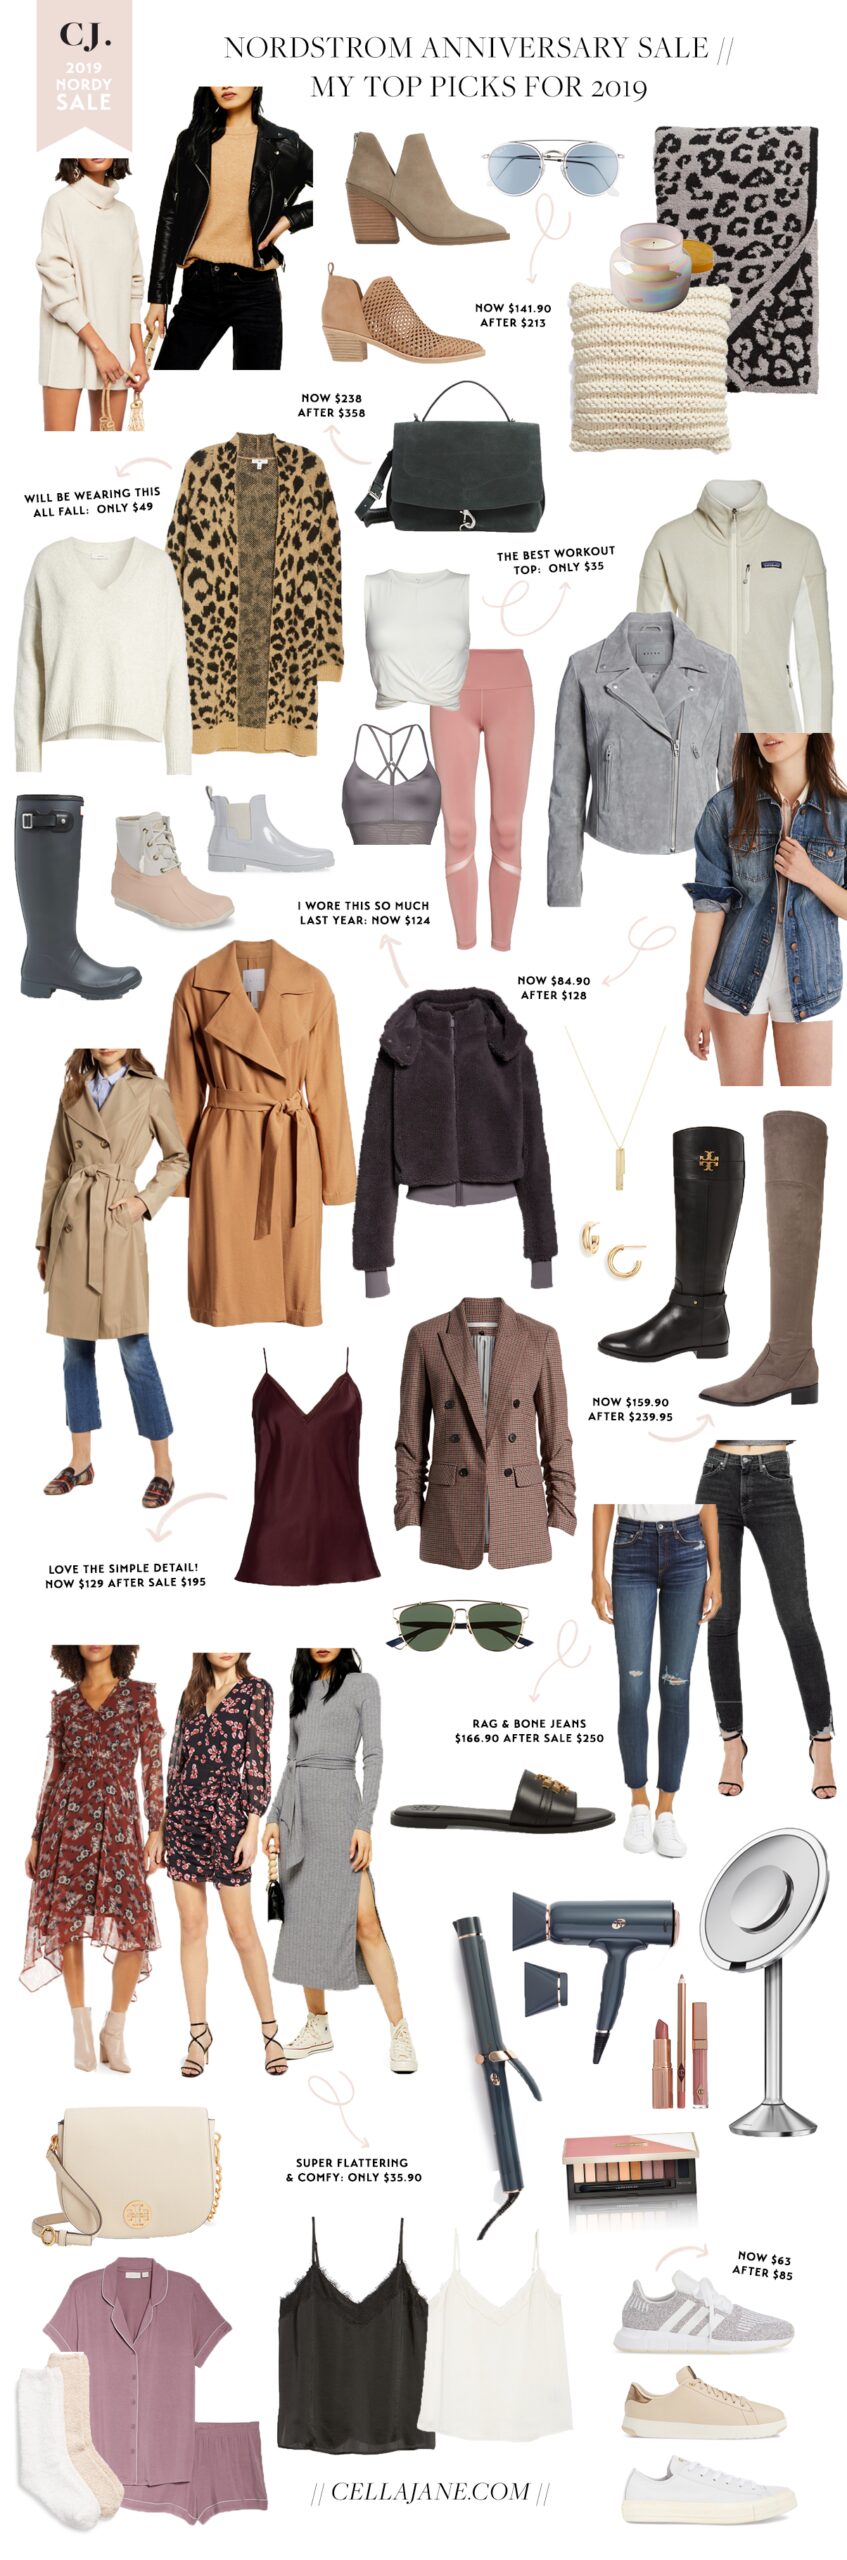 Nordstrom Anniversary Sale Guide: 2019 Early Access Try-On Session